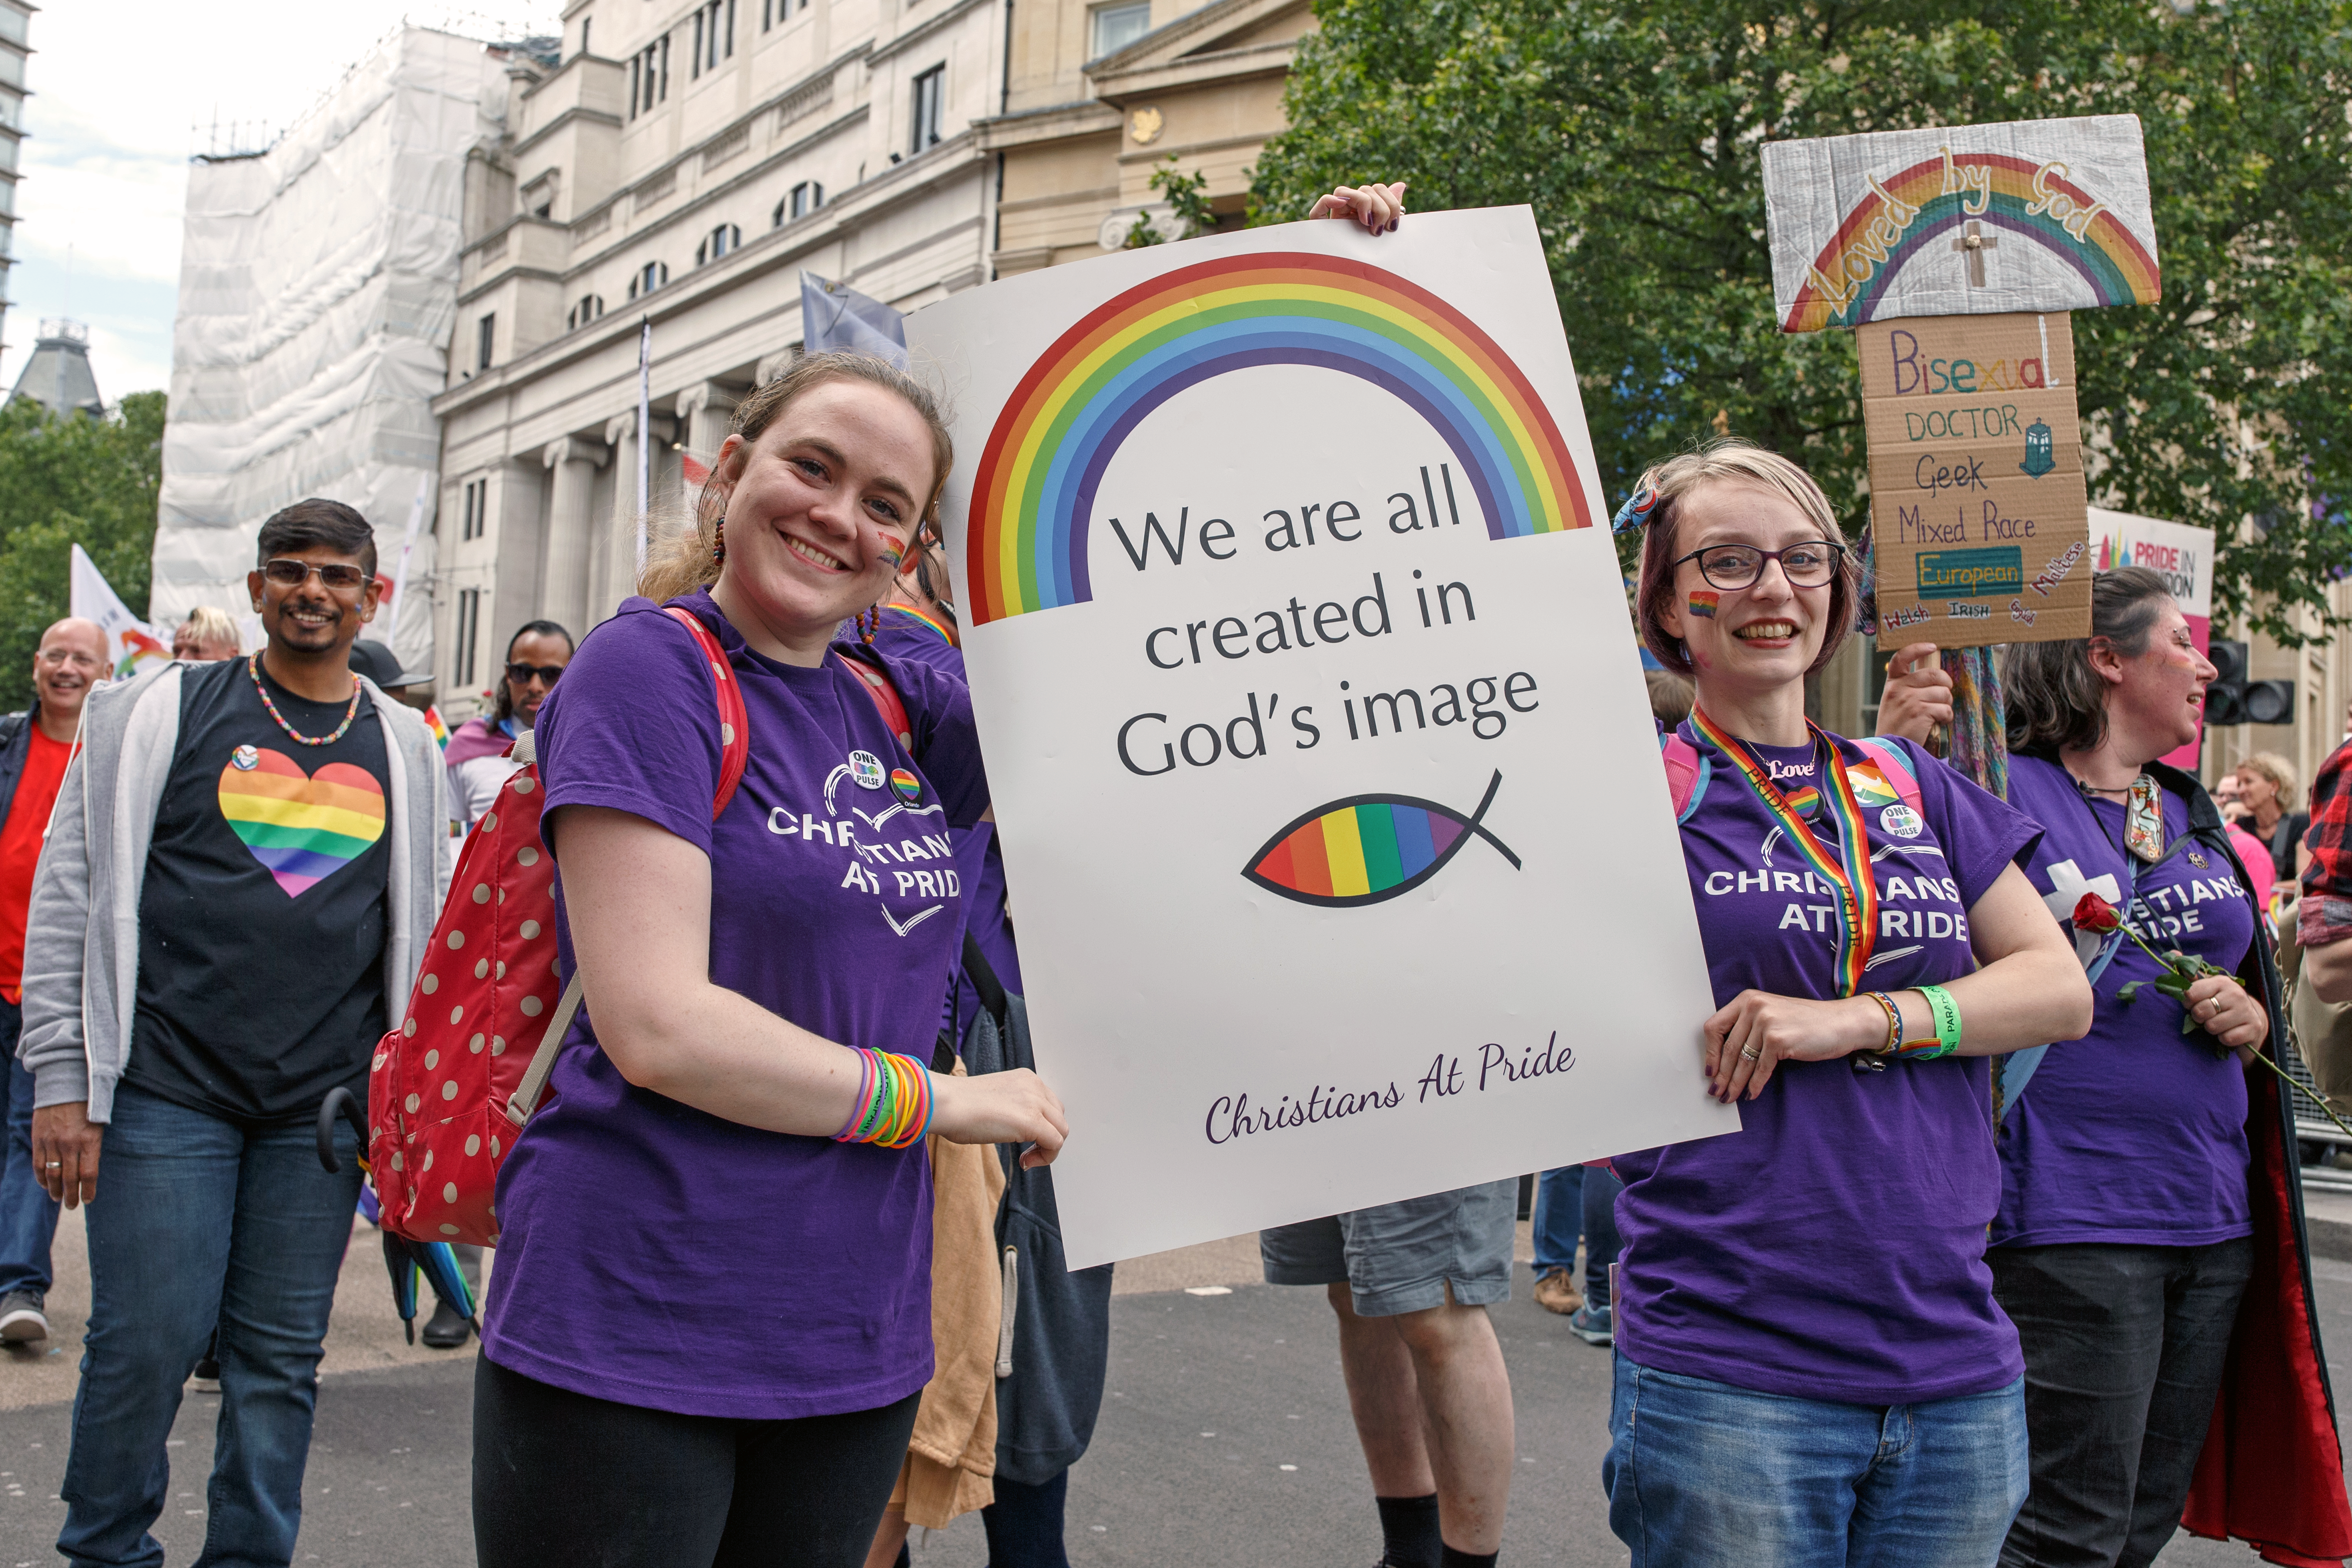 https://upload.wikimedia.org/wikipedia/commons/5/50/Pride_in_London_2016_-_Young_Christians_in_the_parade_with_a_sign.png